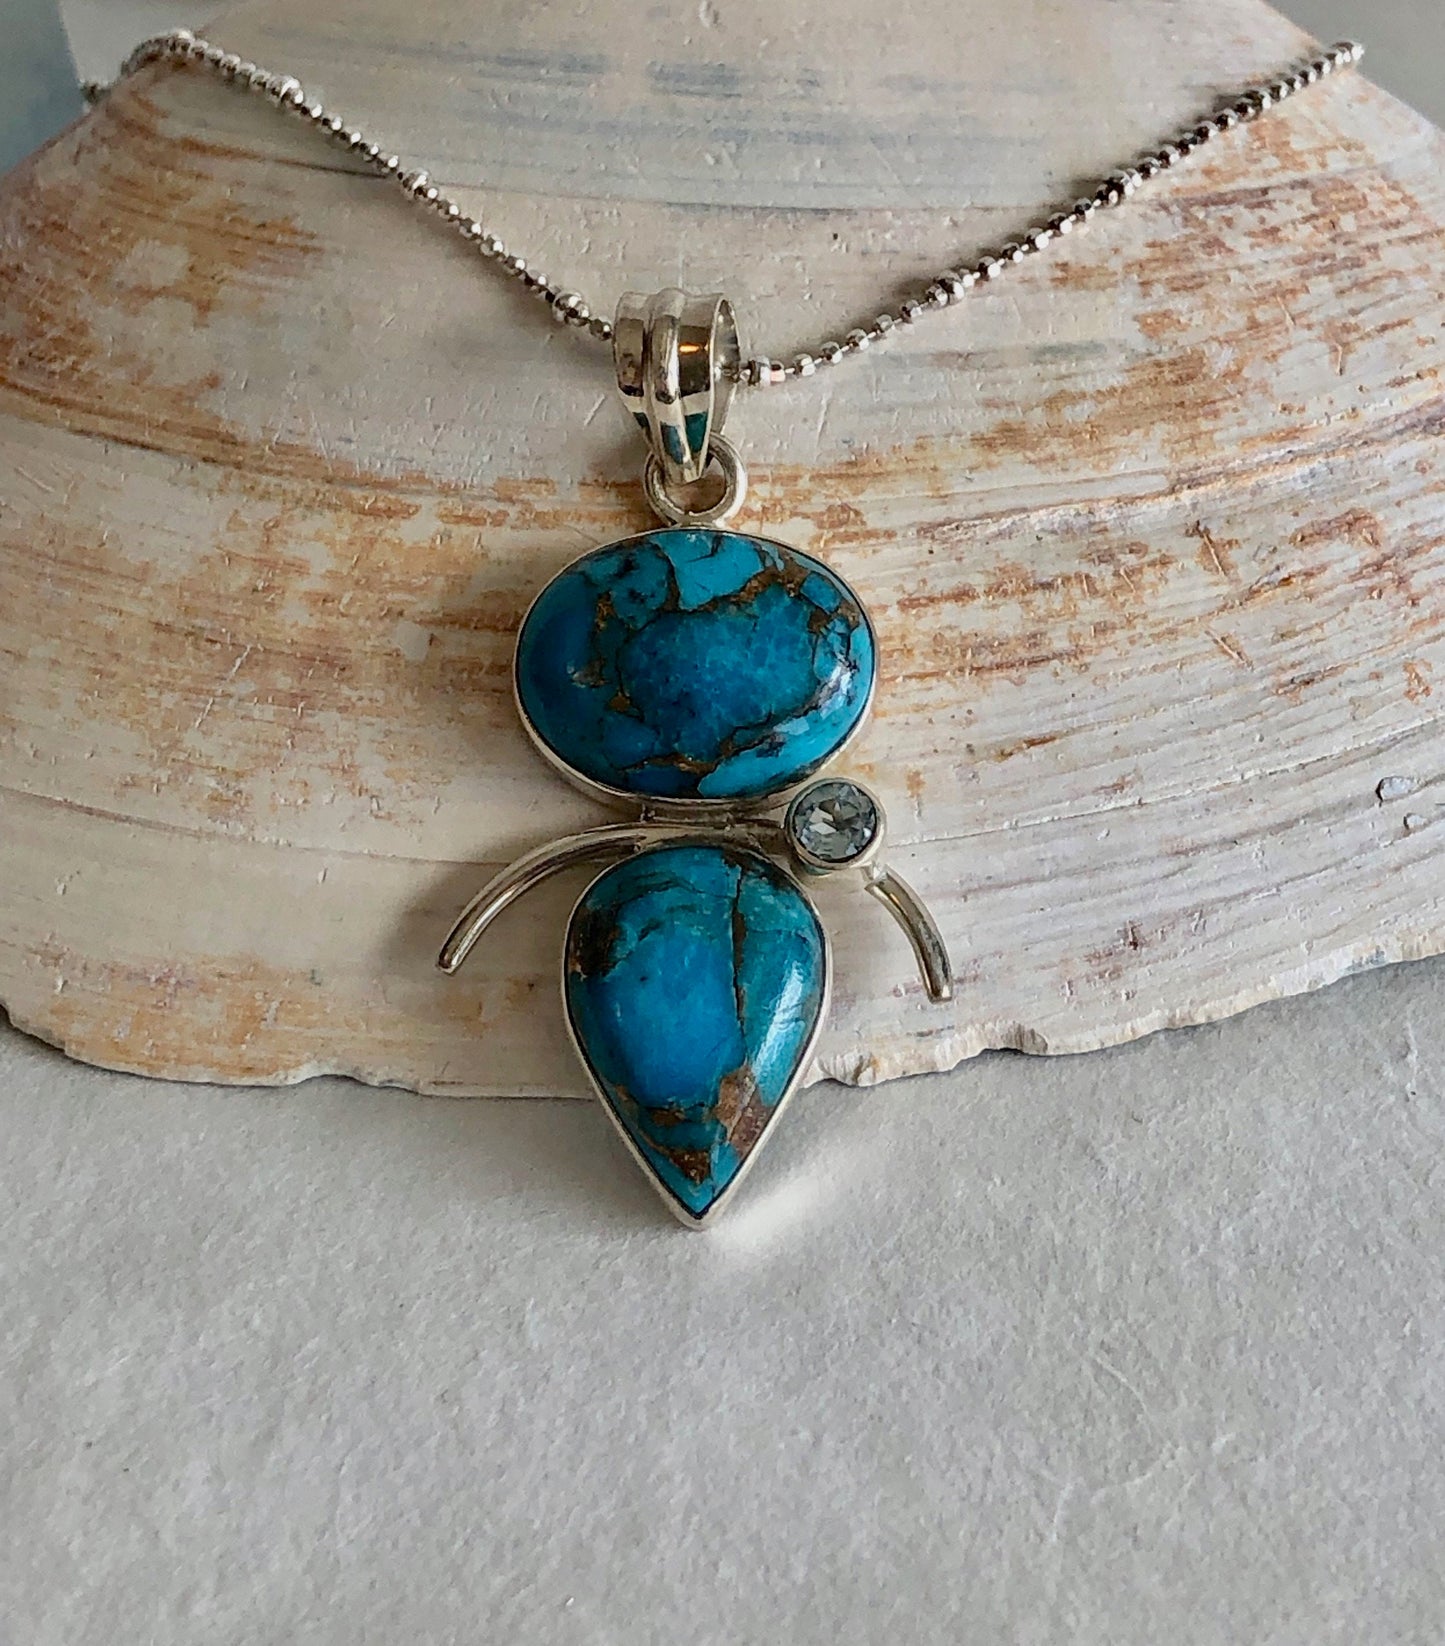 Beautiful turquoise and copper, and quartz pendant. Gift for women, birthday gift, gift for anything!